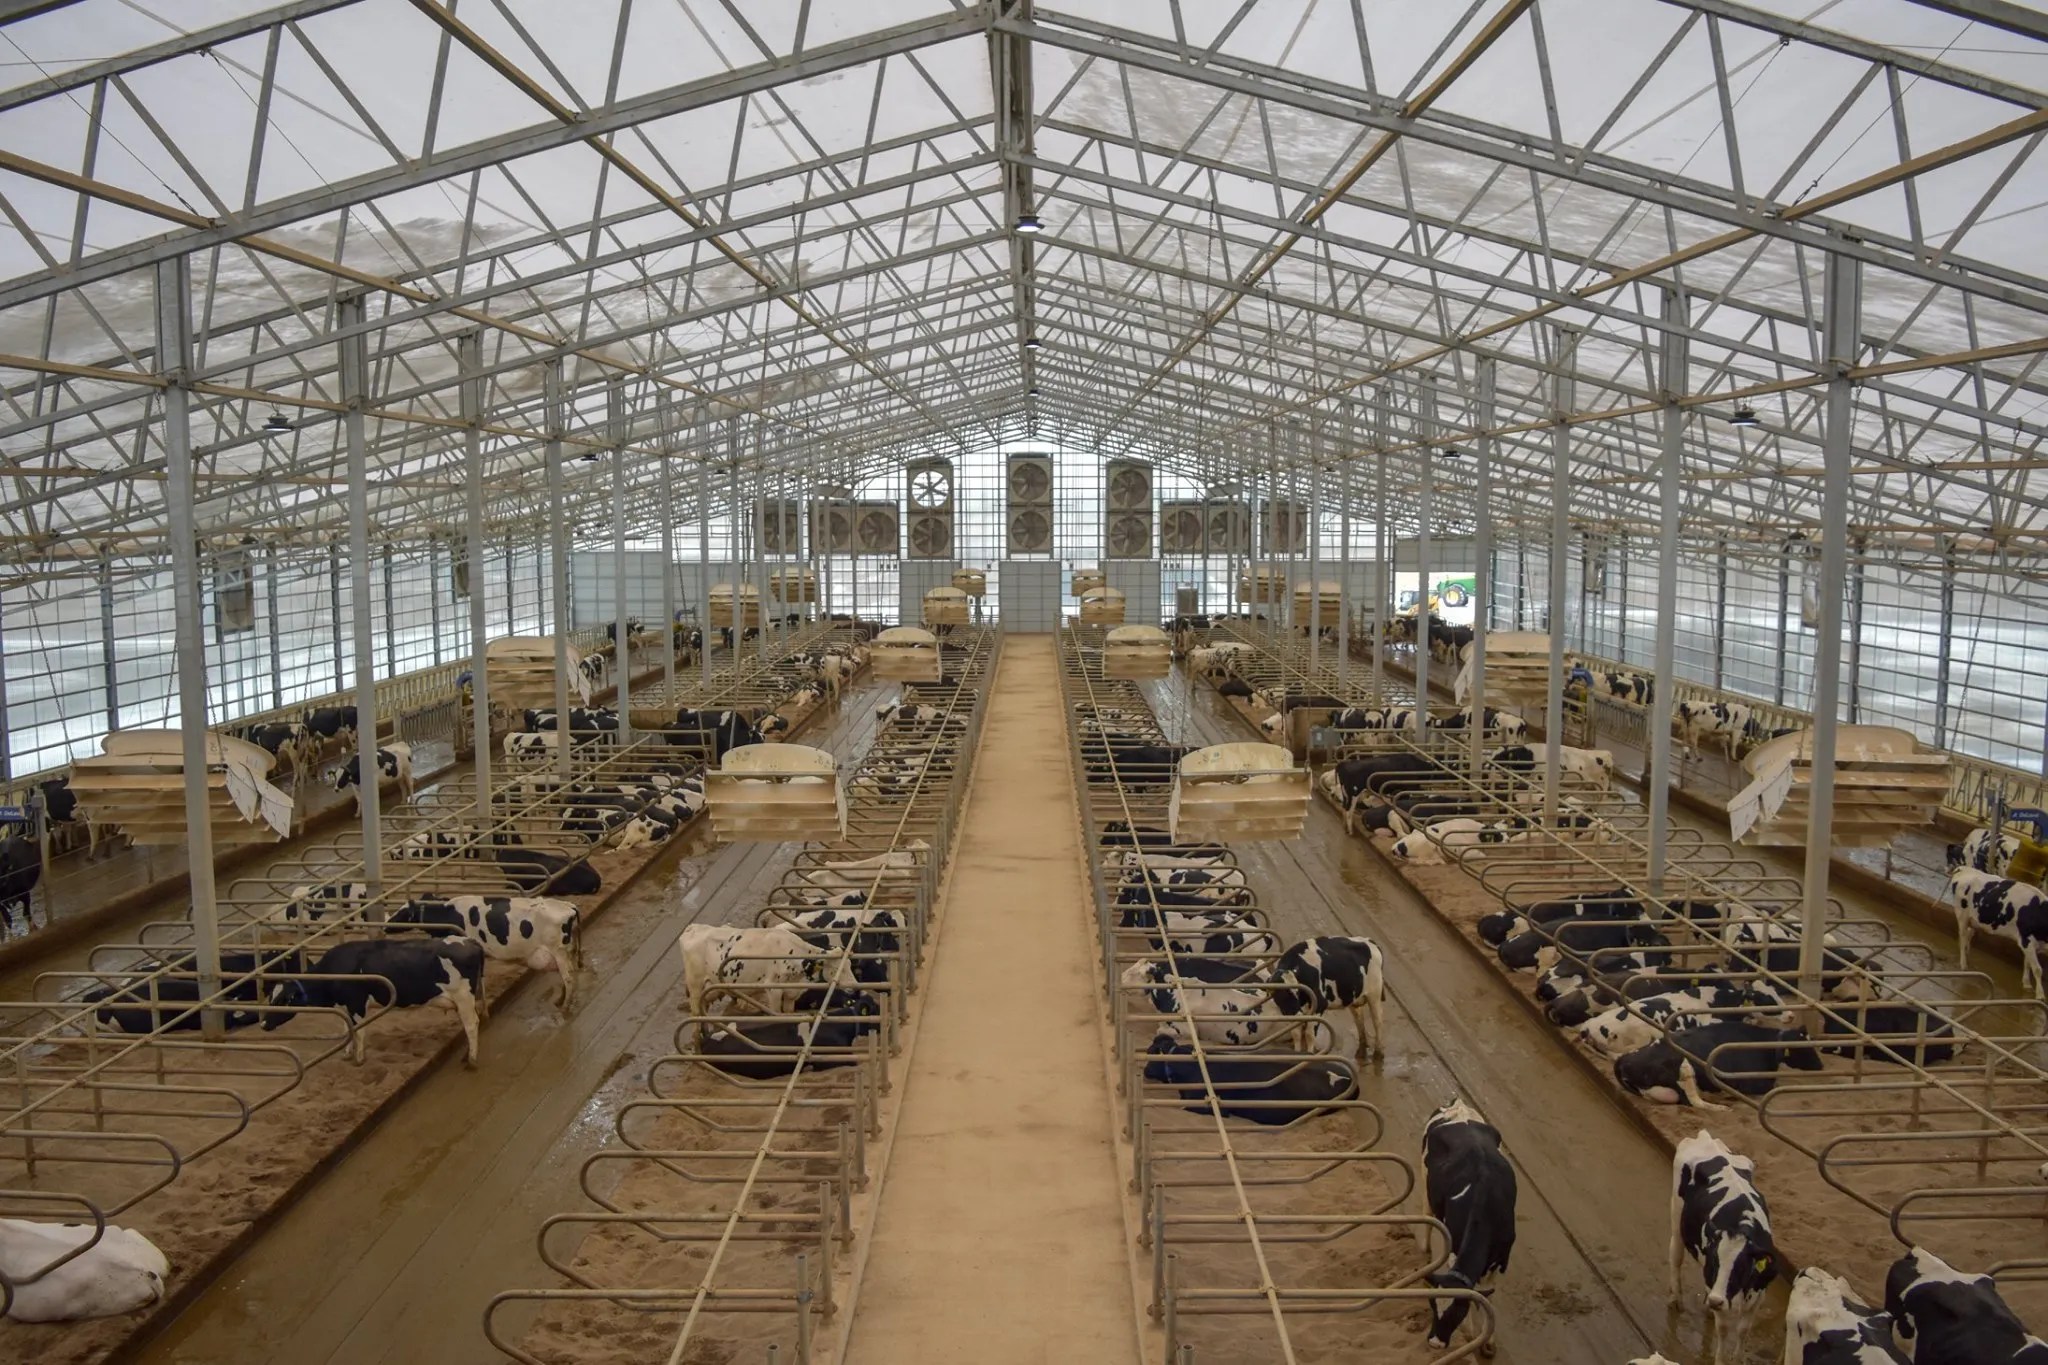 From the observation deck, visitors can watch the normal traffic and activities of the milking herd below, including how they enter and exit the robotic milkers.